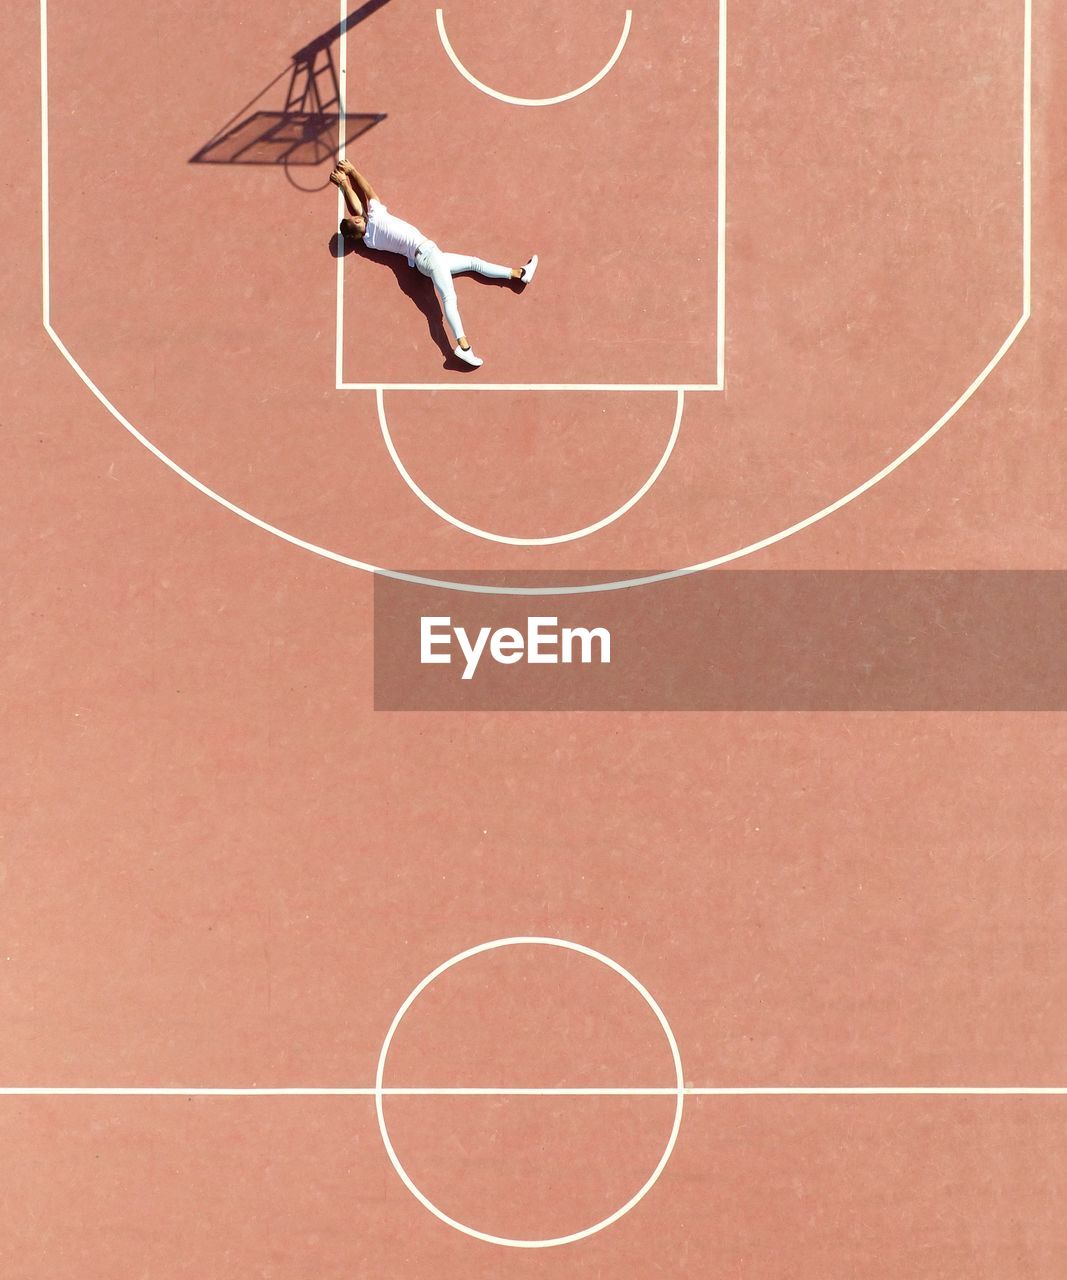 High angle view of man lying on court by basketball hoop shadow